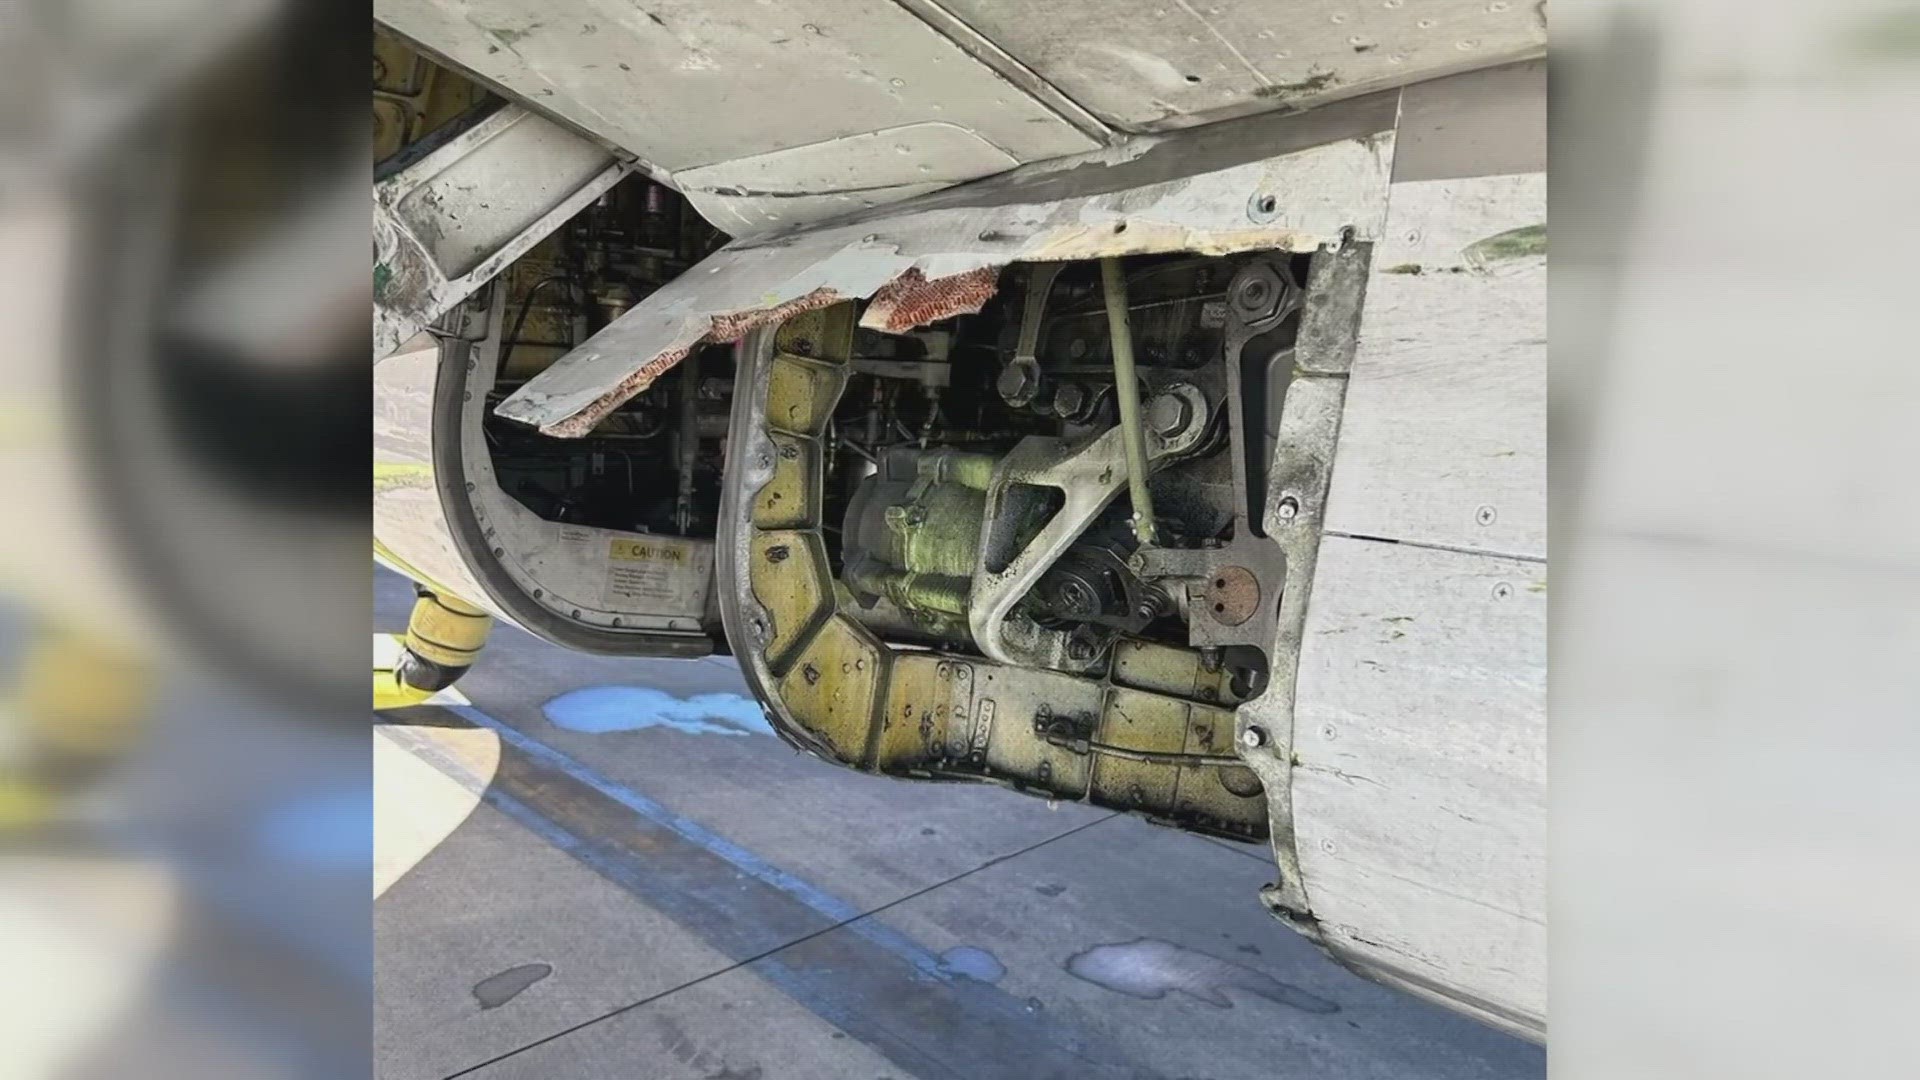 Once crews realized the panel was missing, the airport paused all flights to make sure the piece wasn't on the runway.